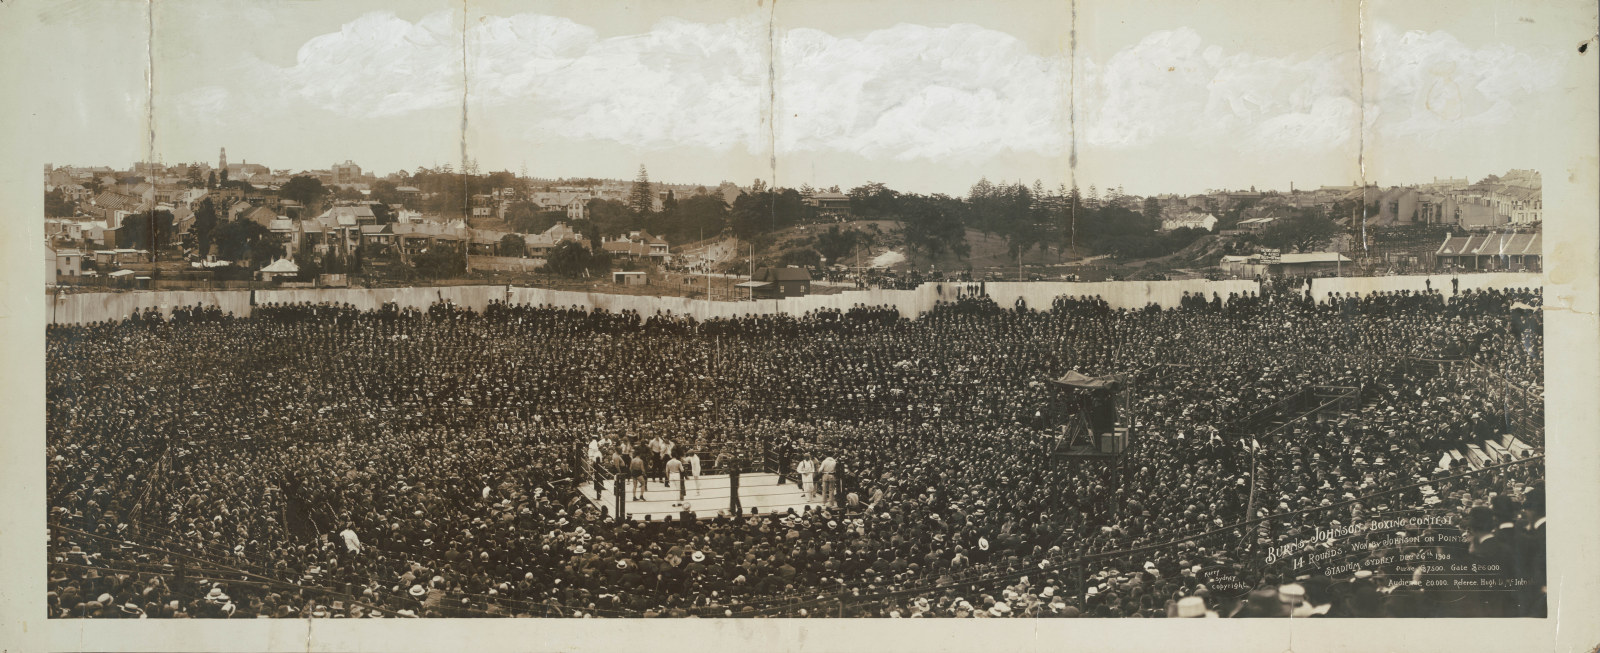 Wide angle image of a large crowd watching a boxing match. The crowd dresses almost all in black contrast with the white ring.